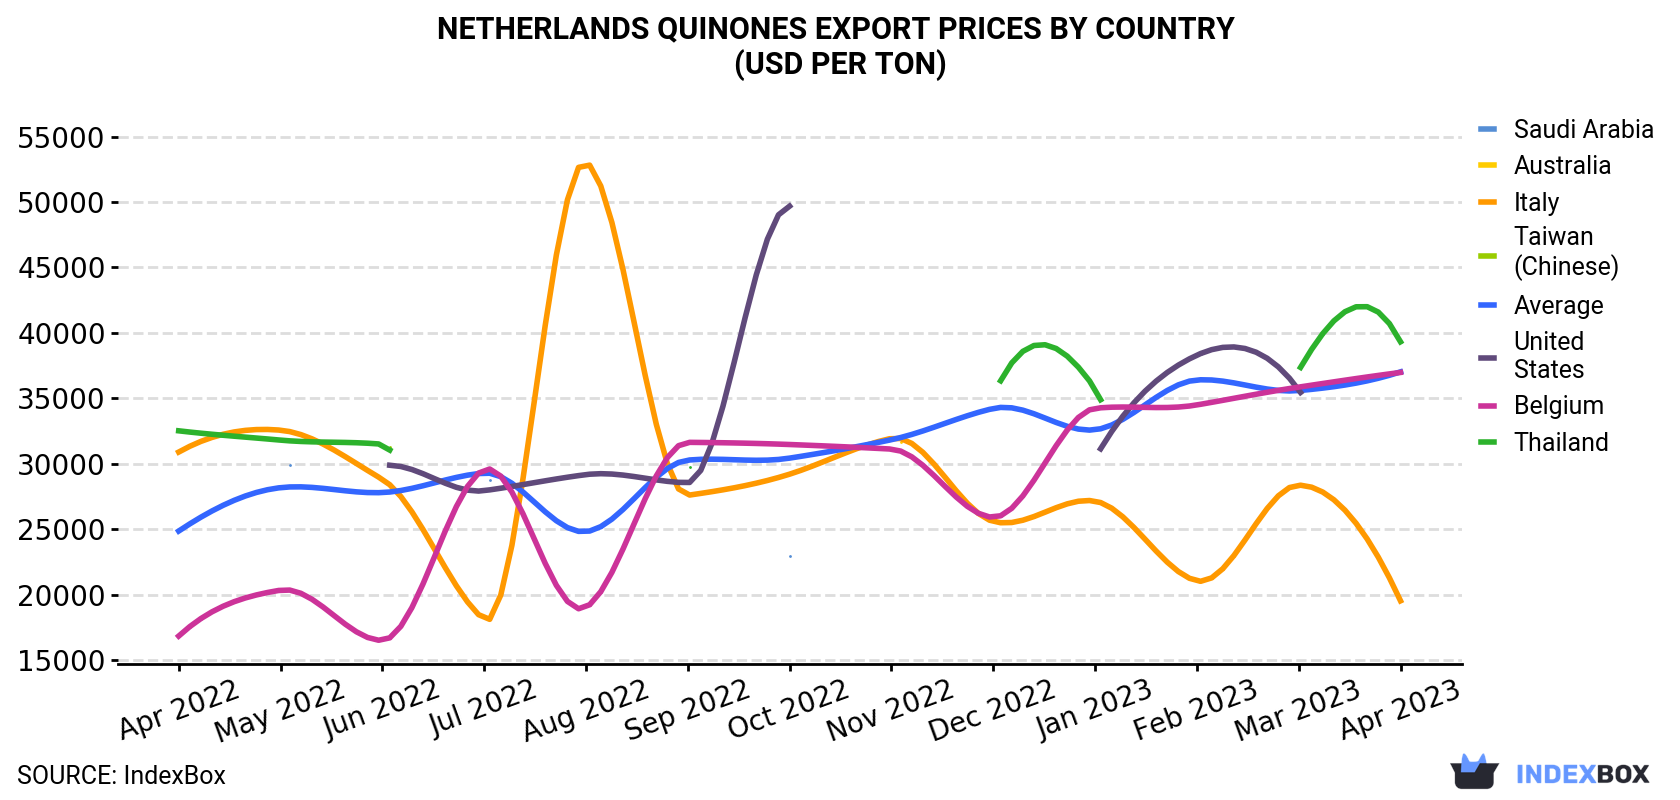 Netherlands Quinones Export Prices By Country (USD Per Ton)